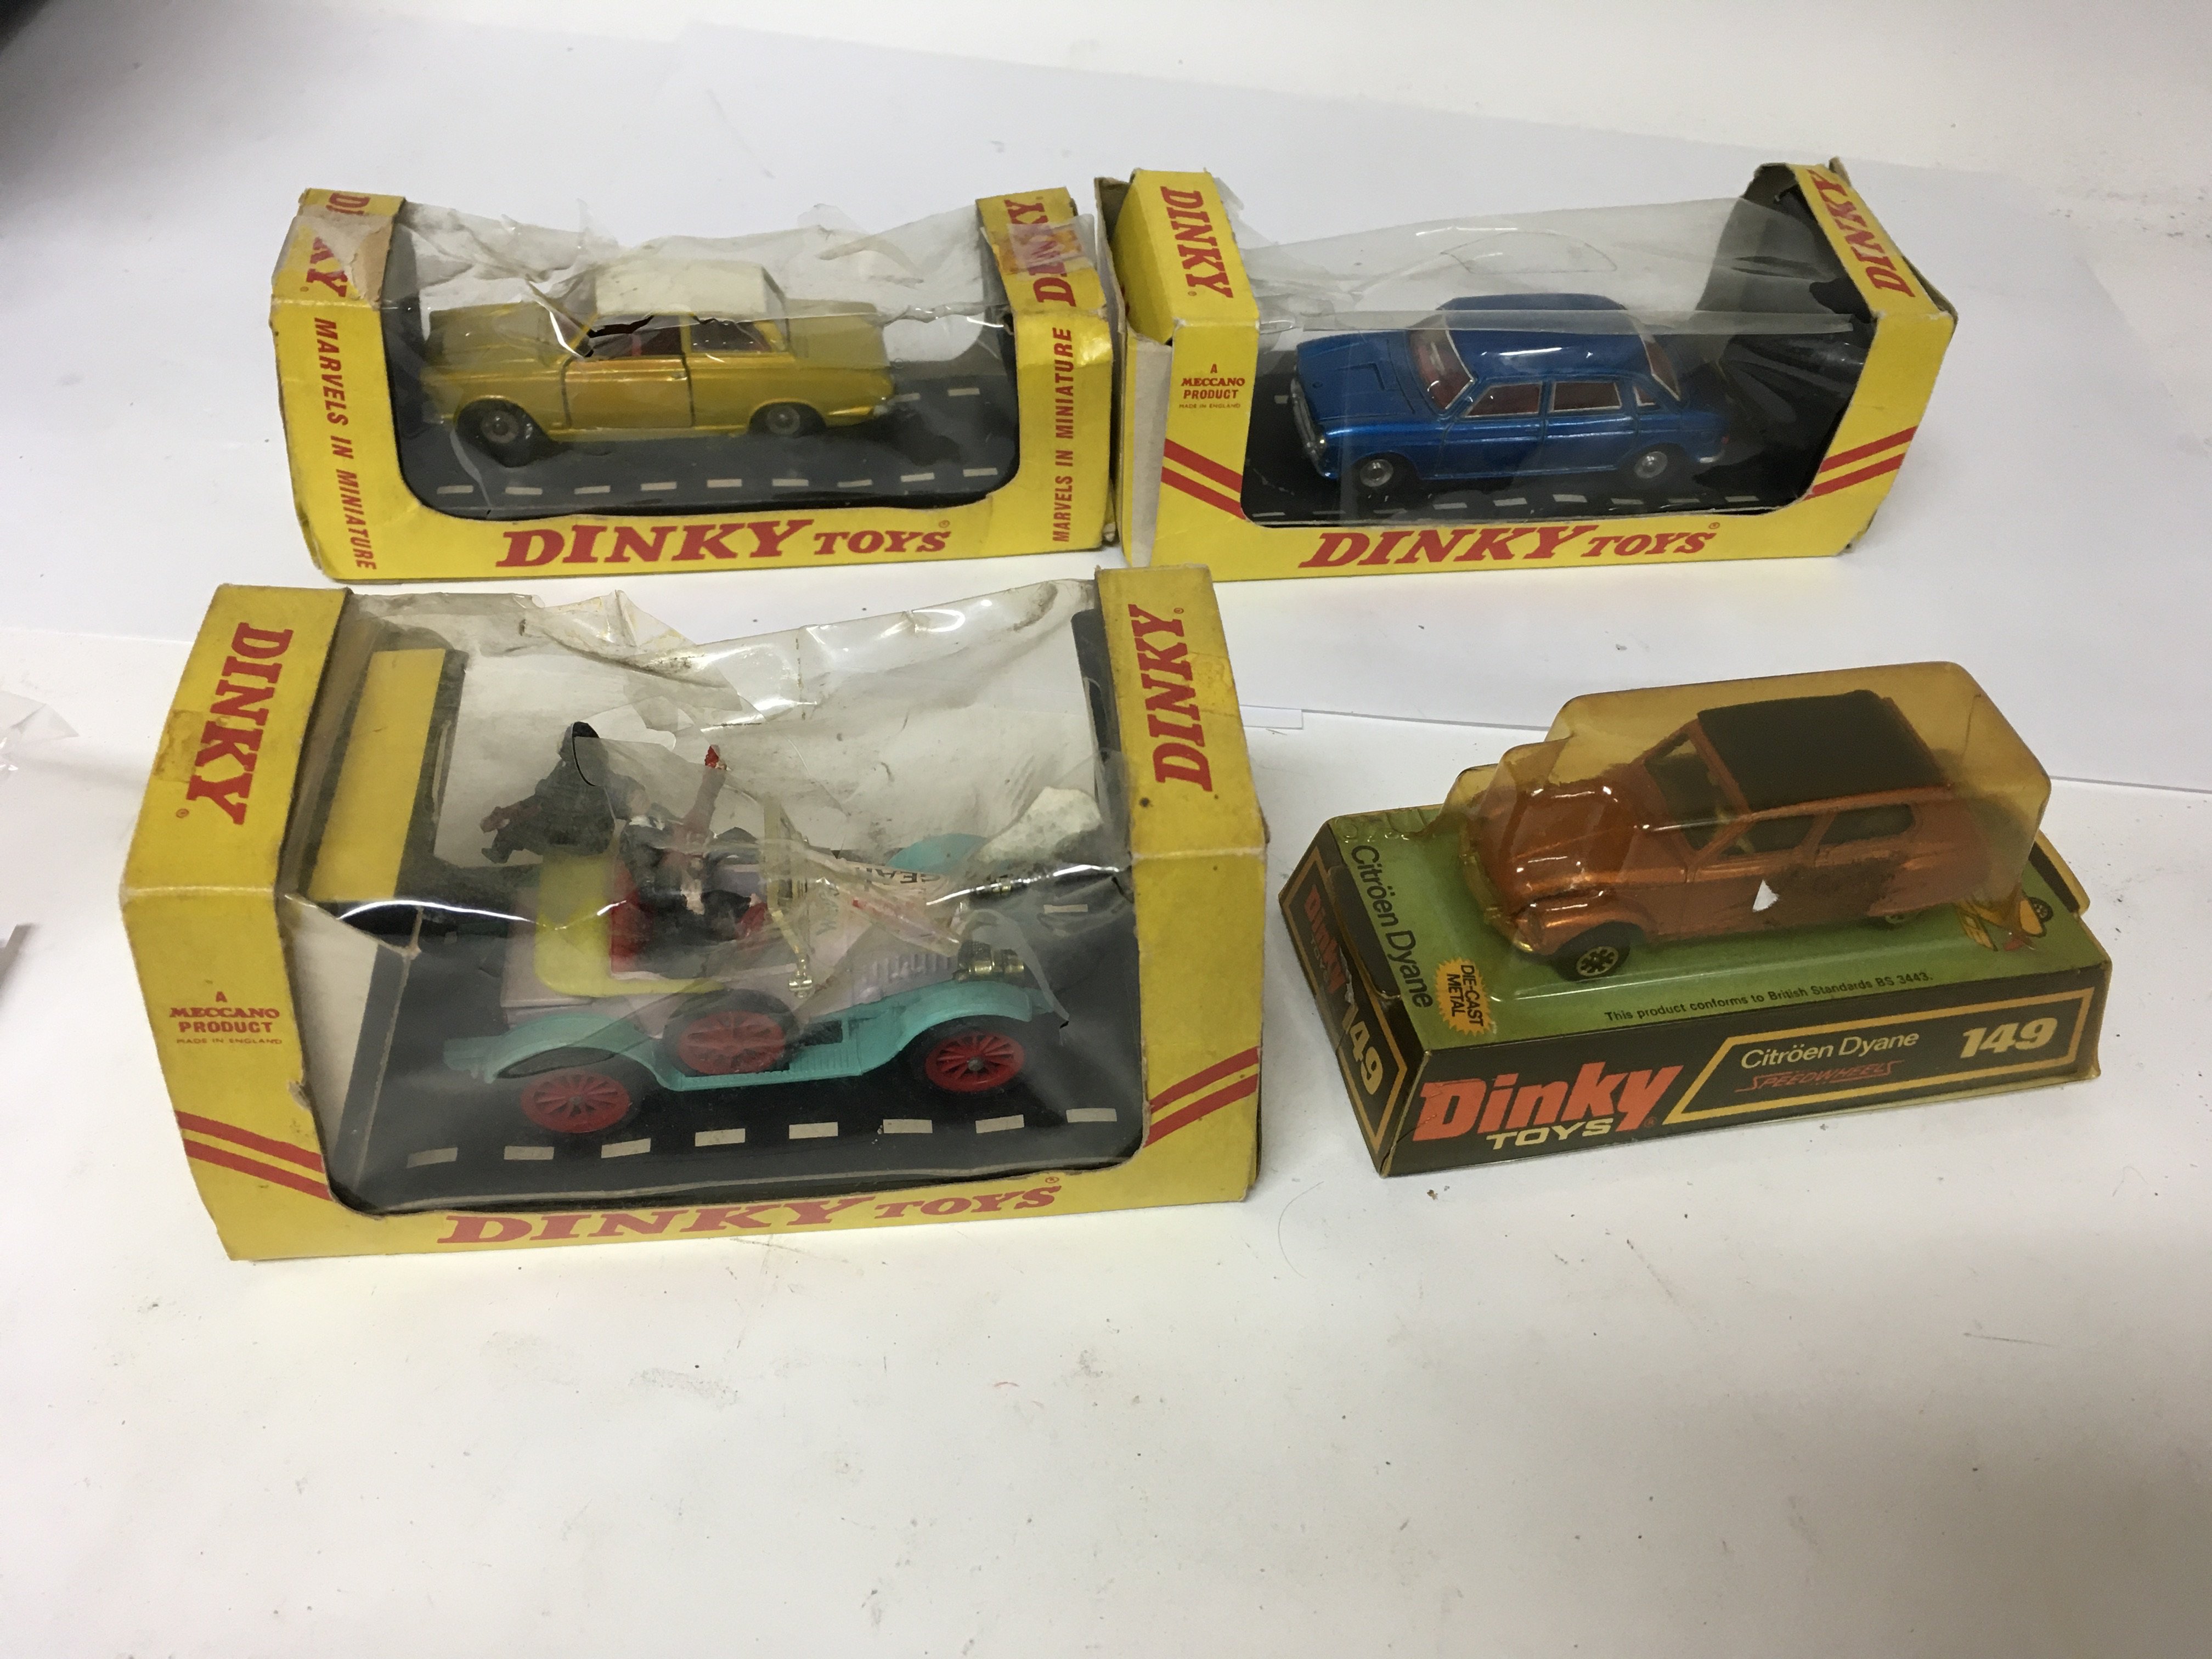 A Dinky Toys 165 ford Cortina, a 1913 Morris Oxfor